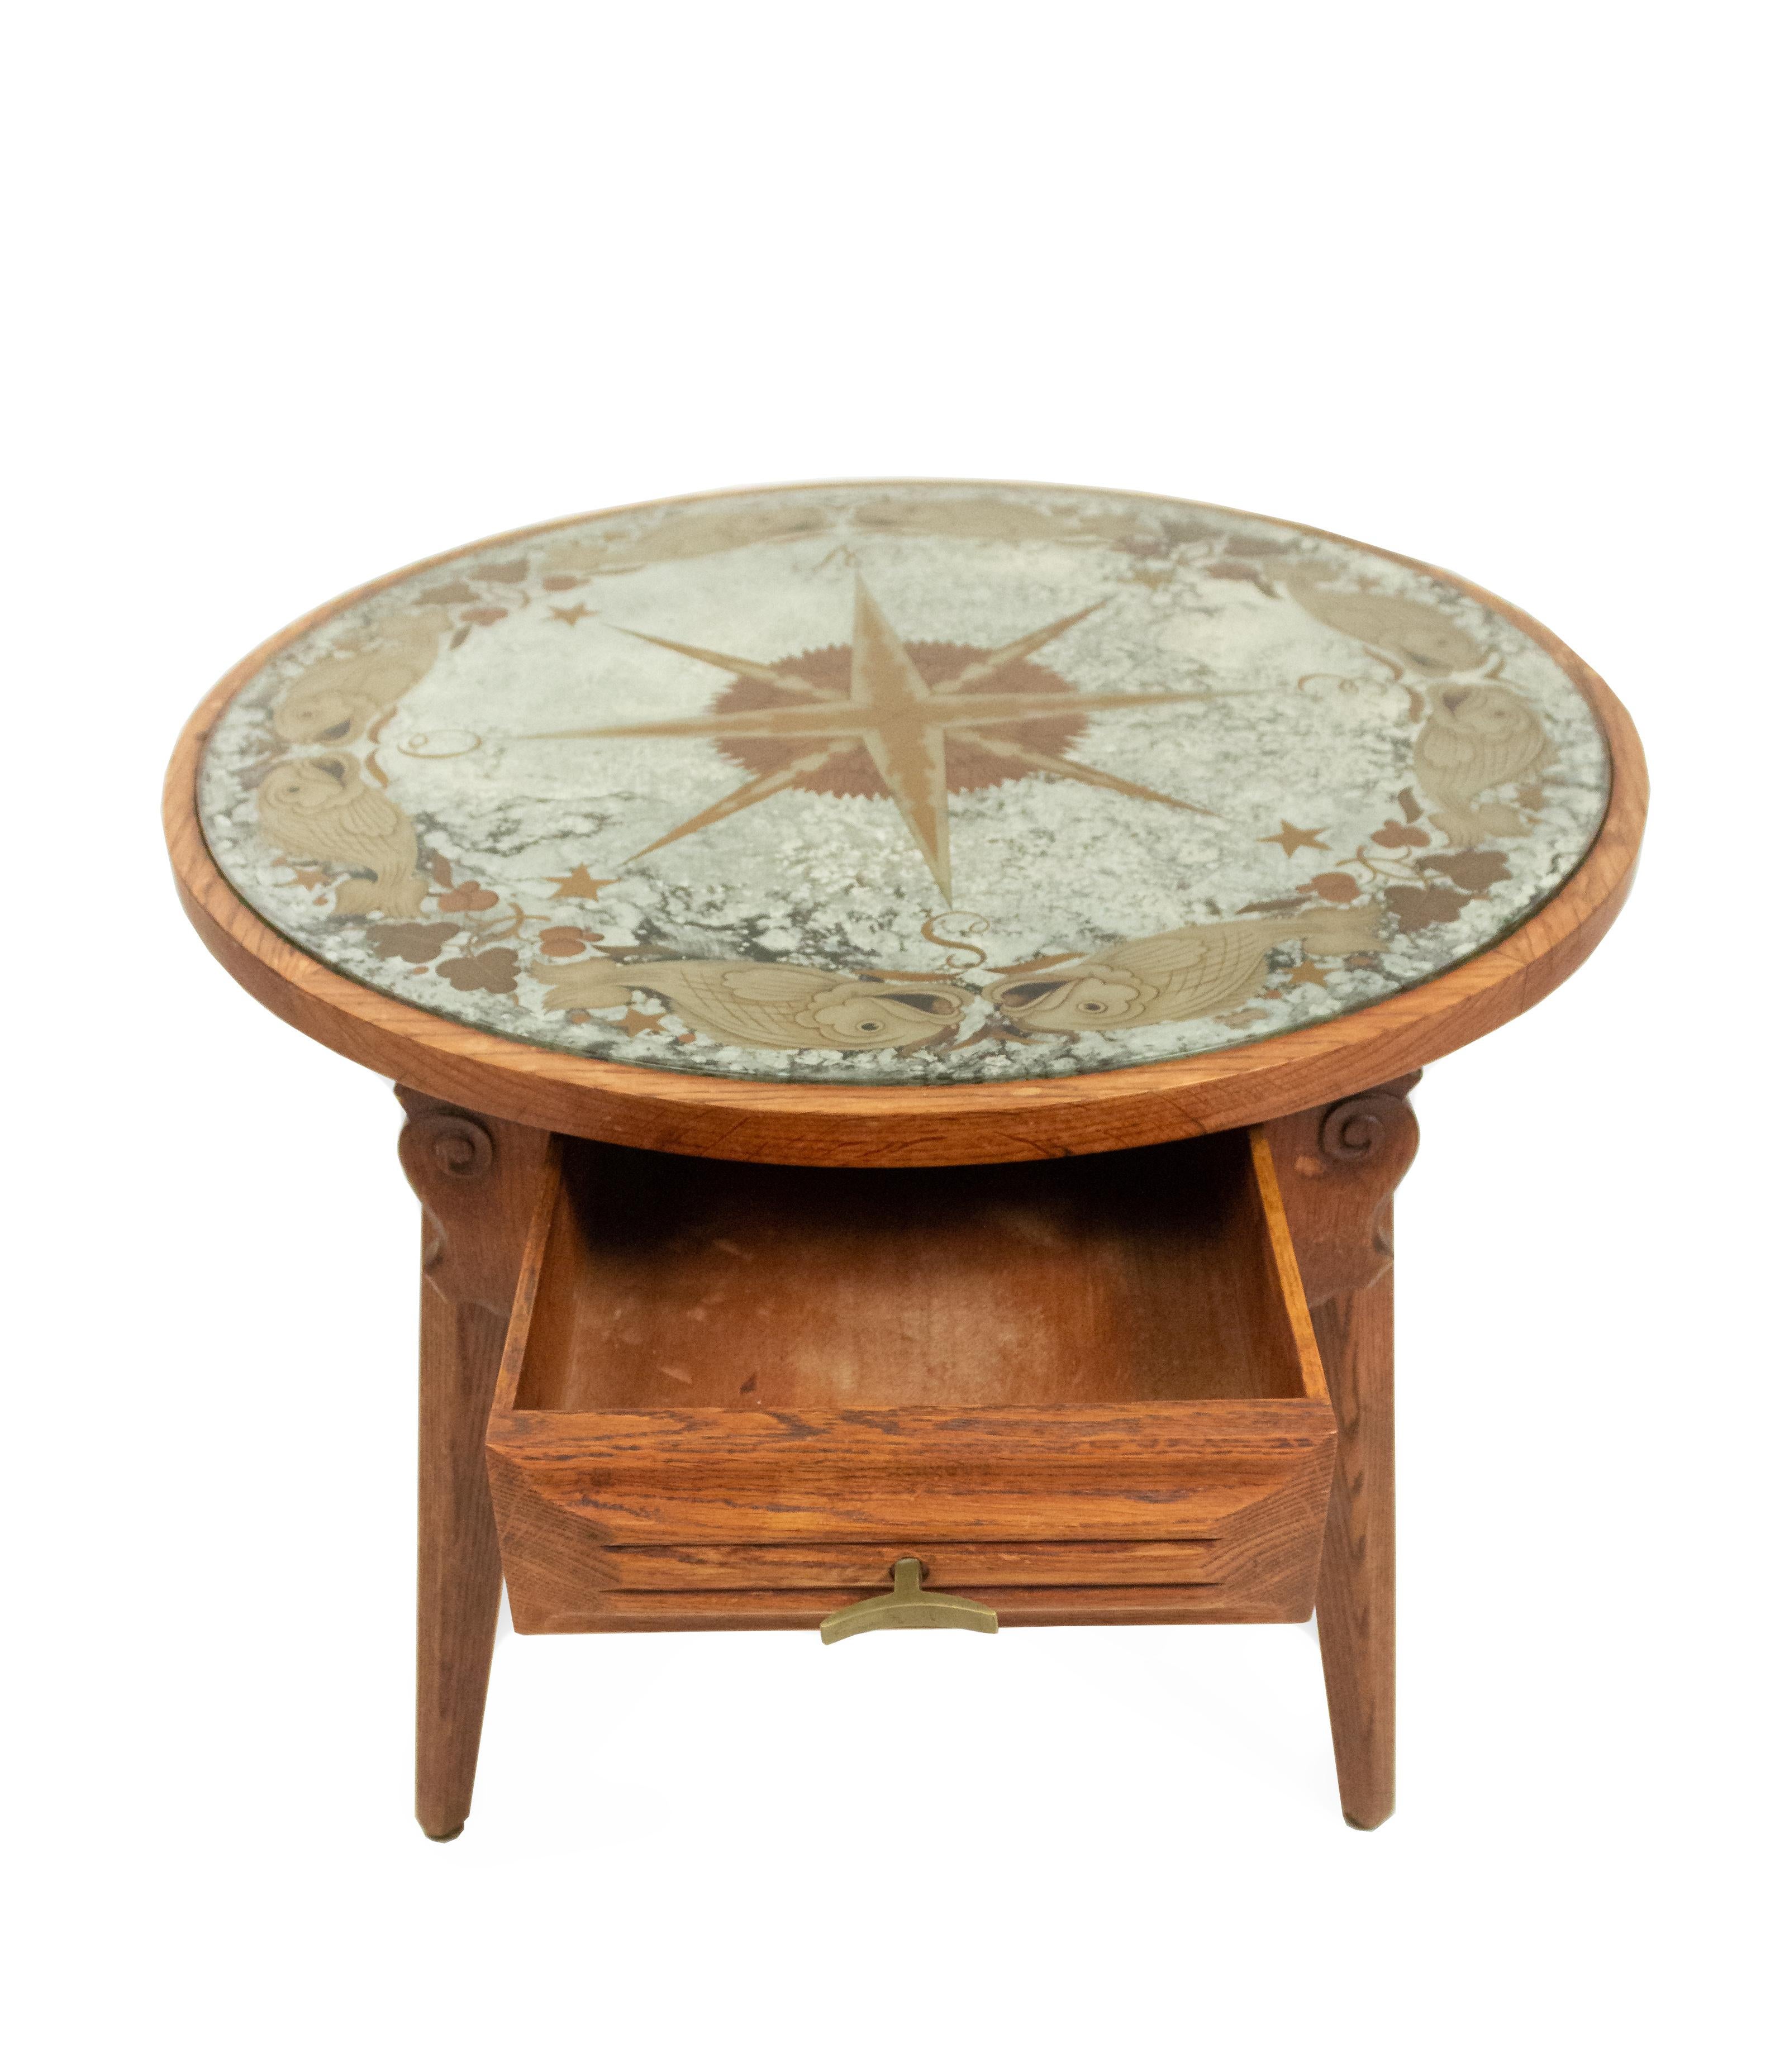 French midcentury coffee table with a carved ash wood base on 4 splayed feet with a drawer having a brass pull supporting a round églomisé inset mirrored top decorated with a center compass.